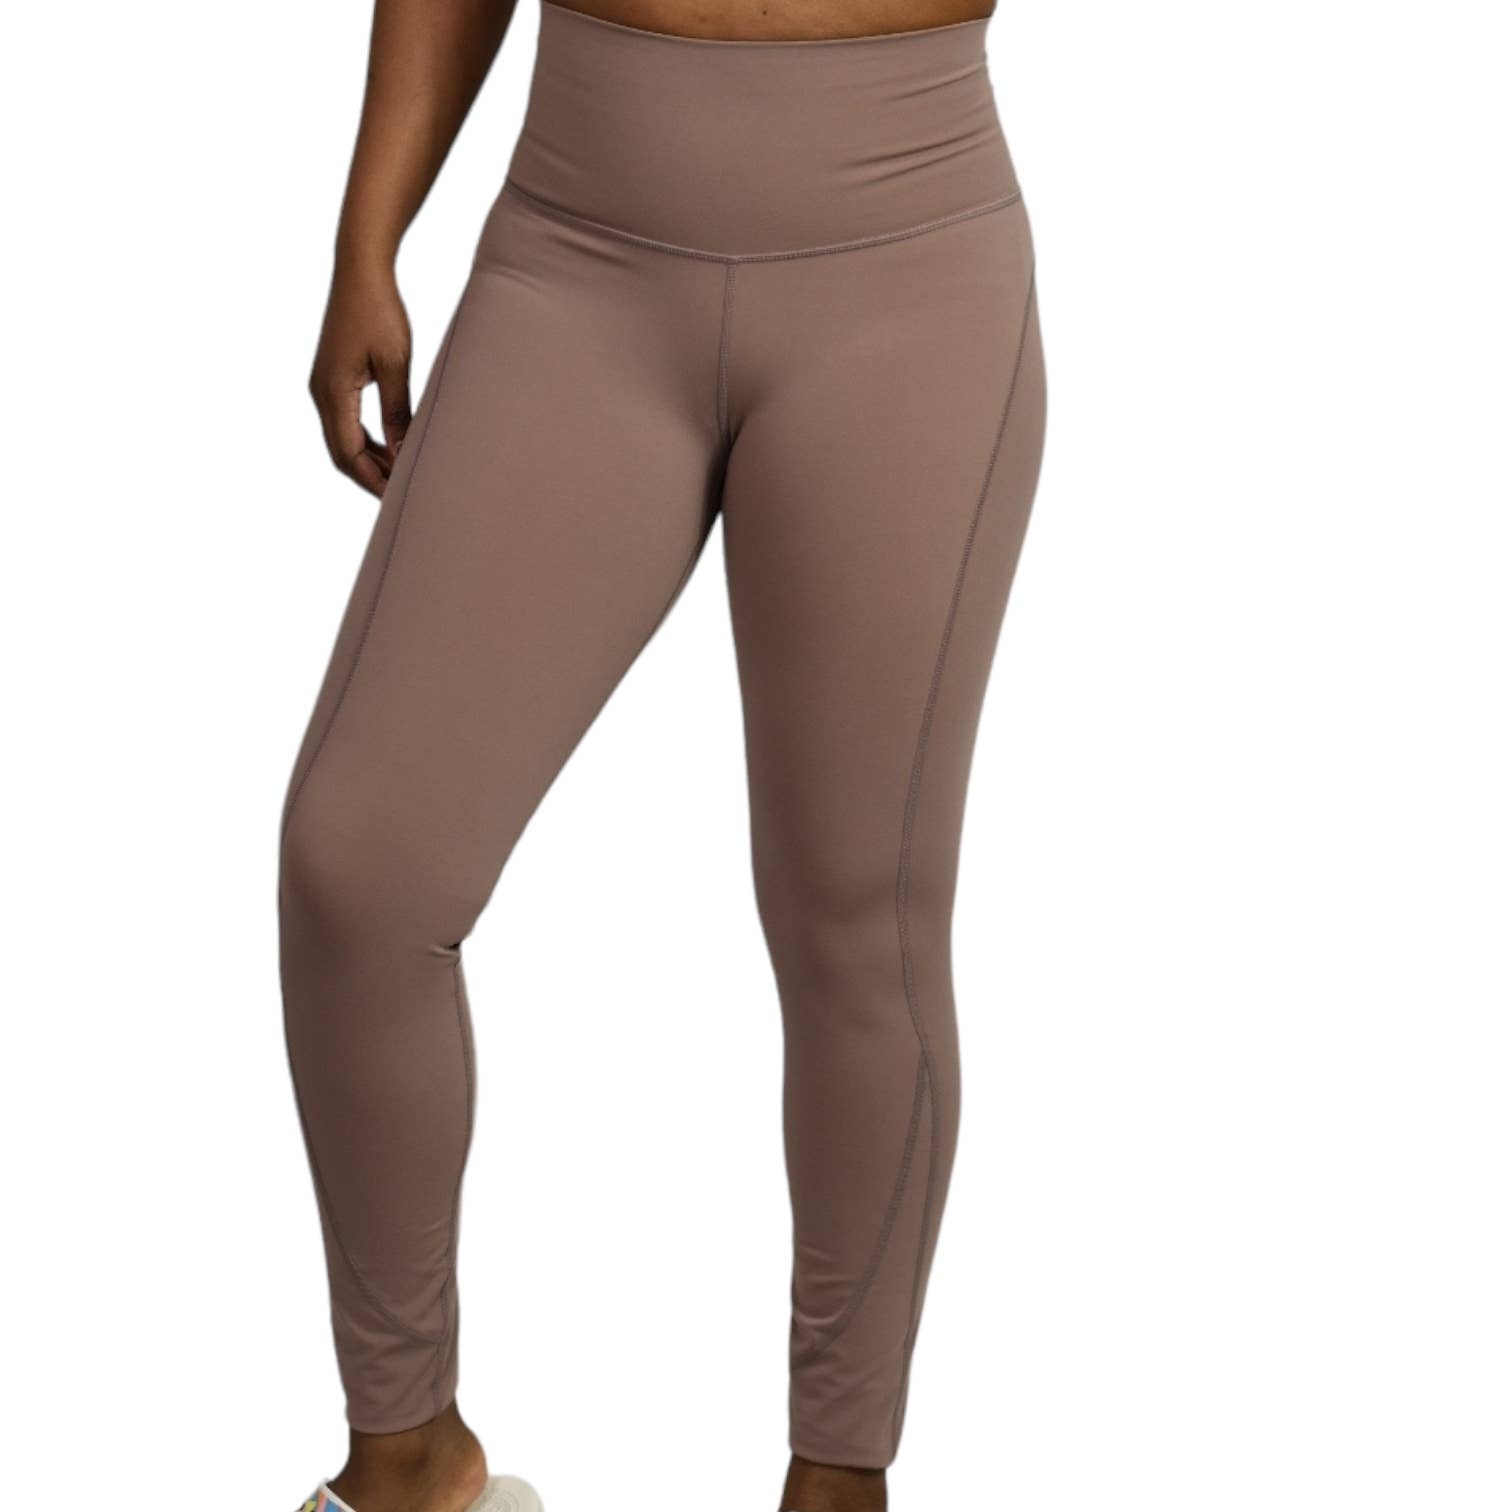 Glyder Pure Pocket Leggings Brown Neutral Sustainable Contoured High Waist Full Length Size Small